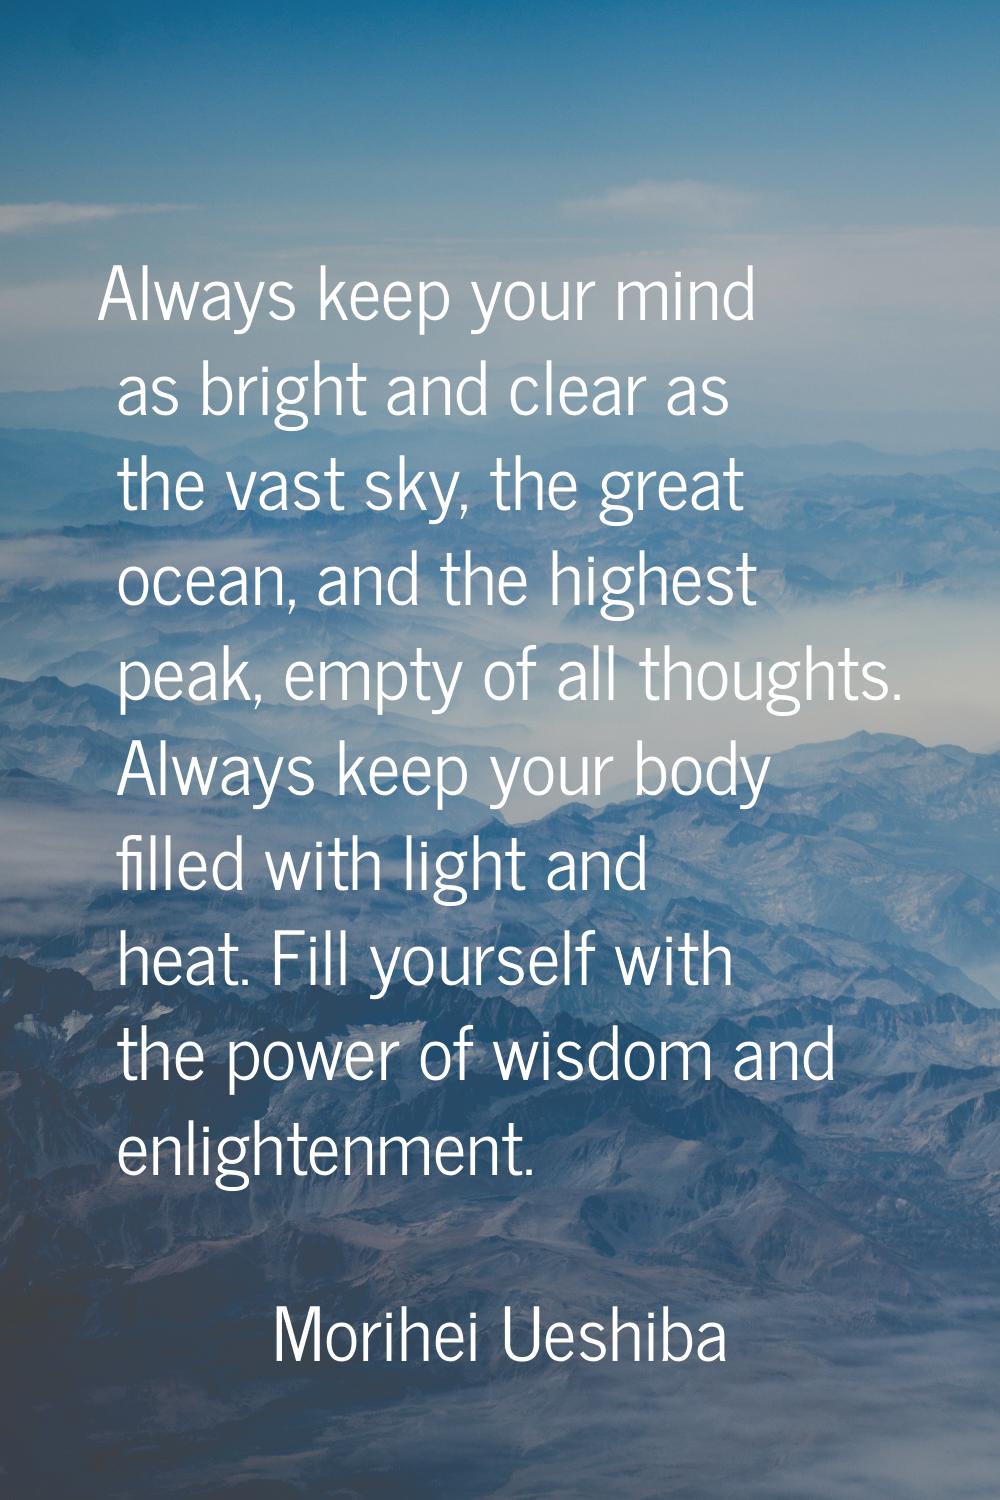 Always keep your mind as bright and clear as the vast sky, the great ocean, and the highest peak, e